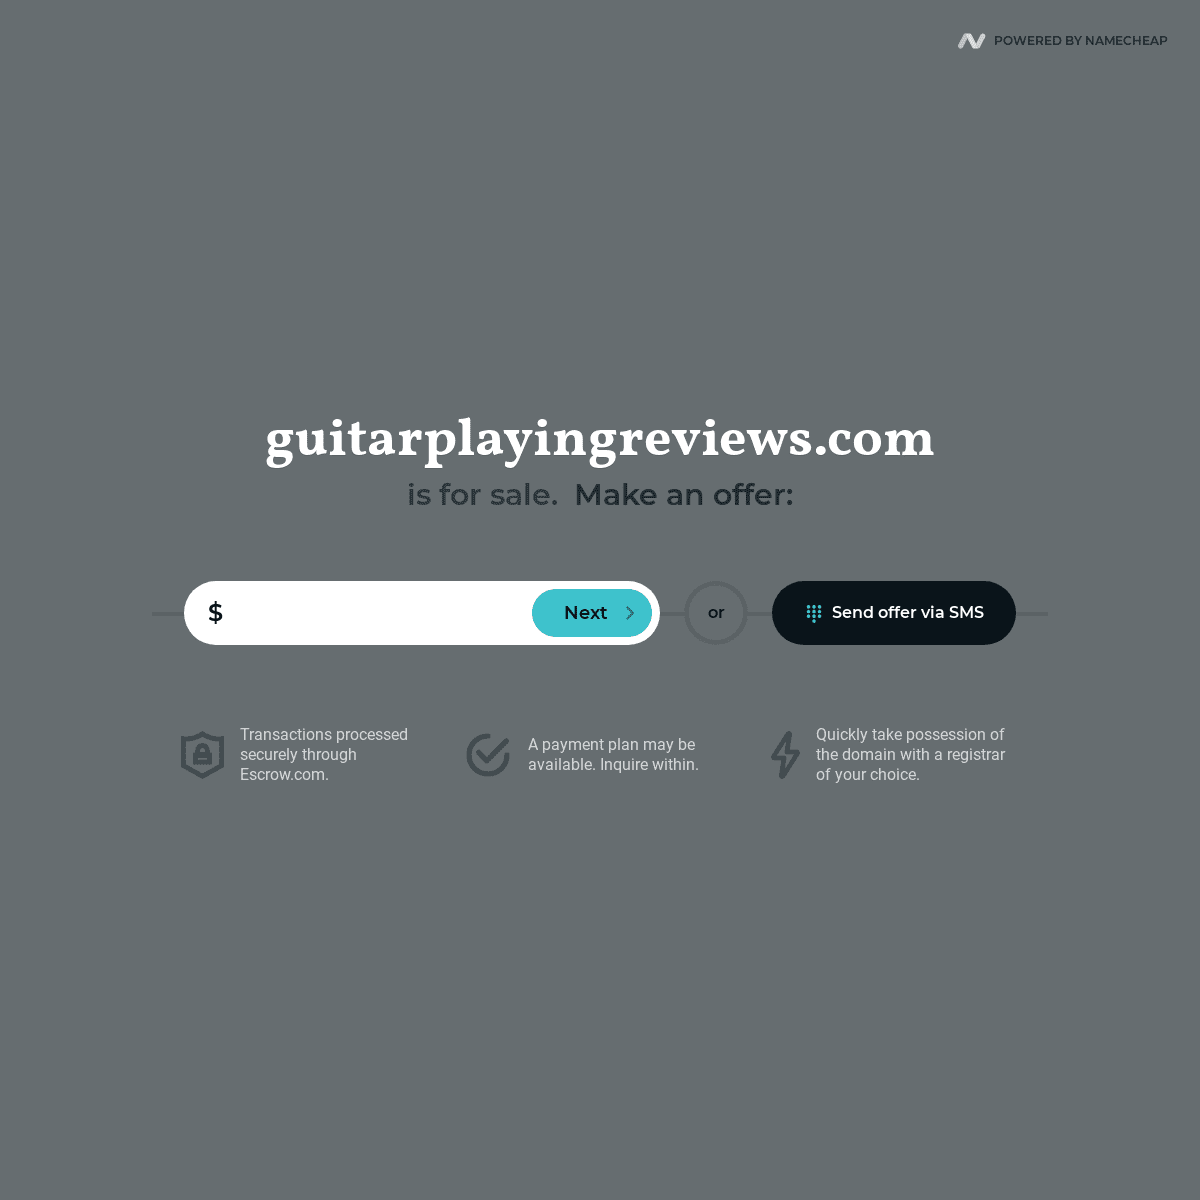 A complete backup of https://guitarplayingreviews.com